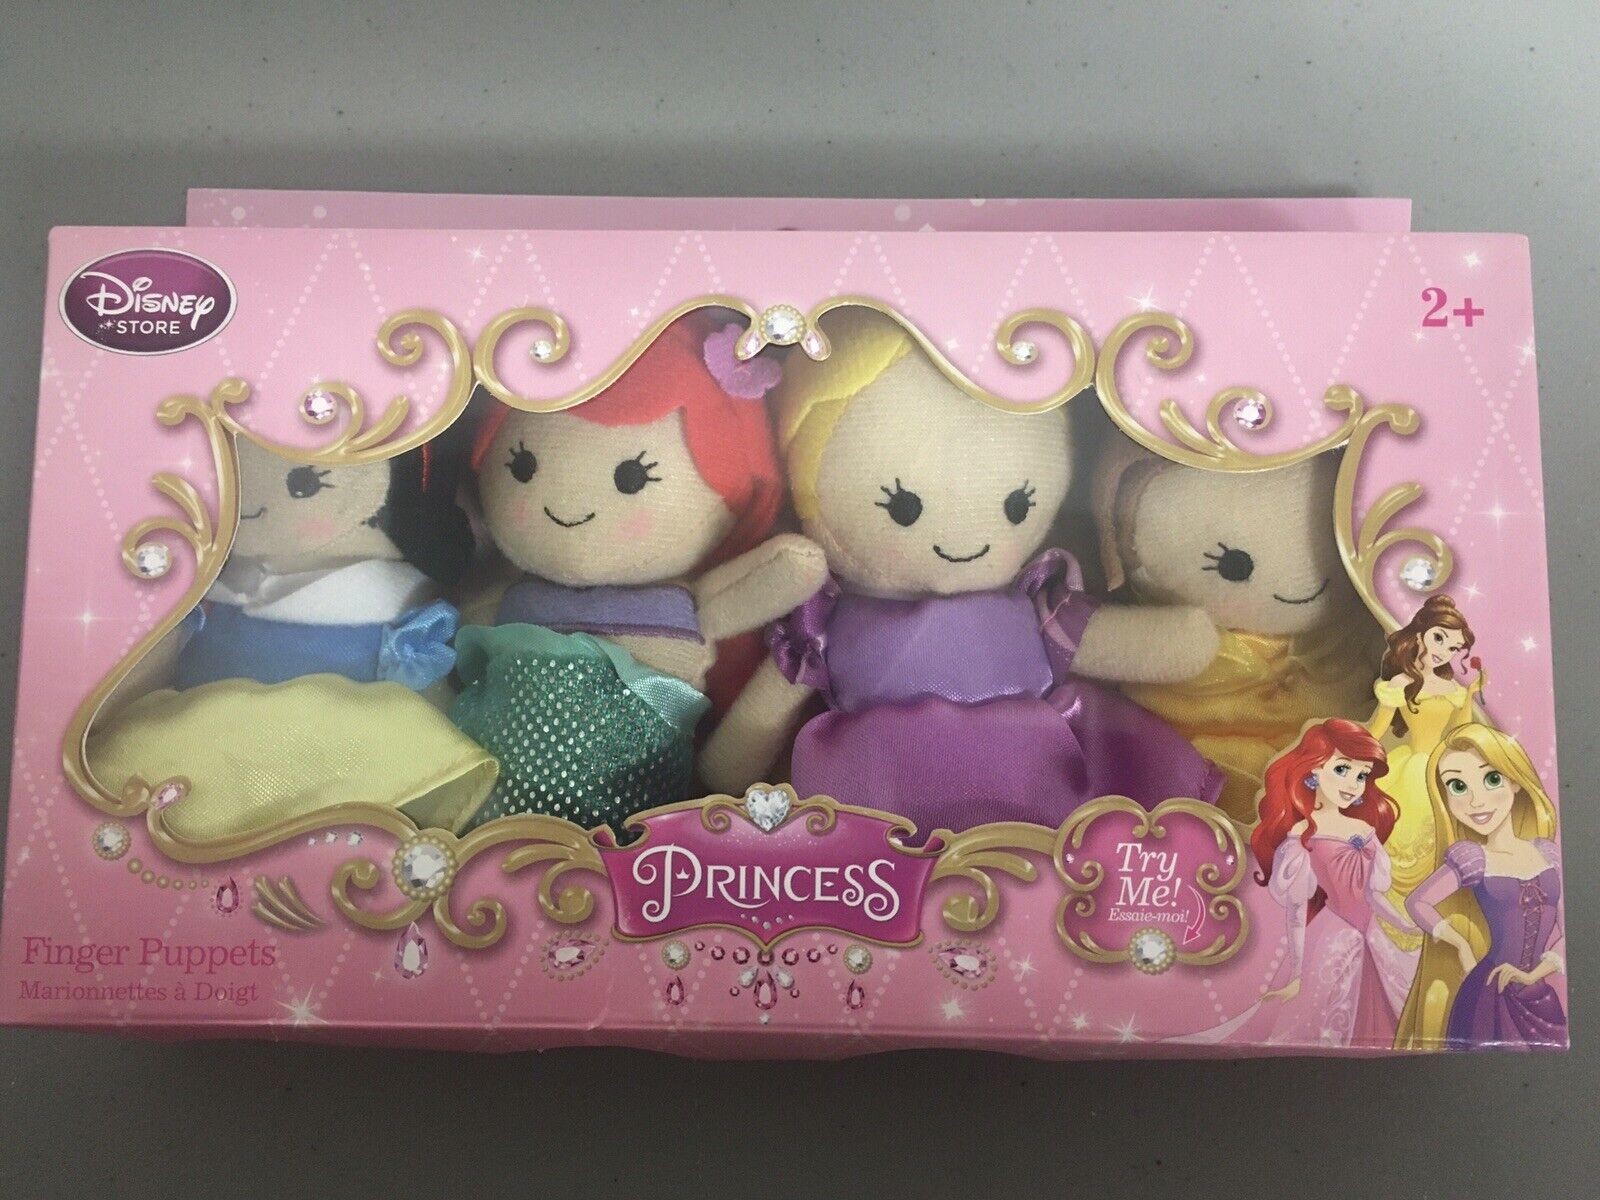 Disney Store Exclusive 4 Pack Princess Finger Puppets - Fabric- Lace Details NEW